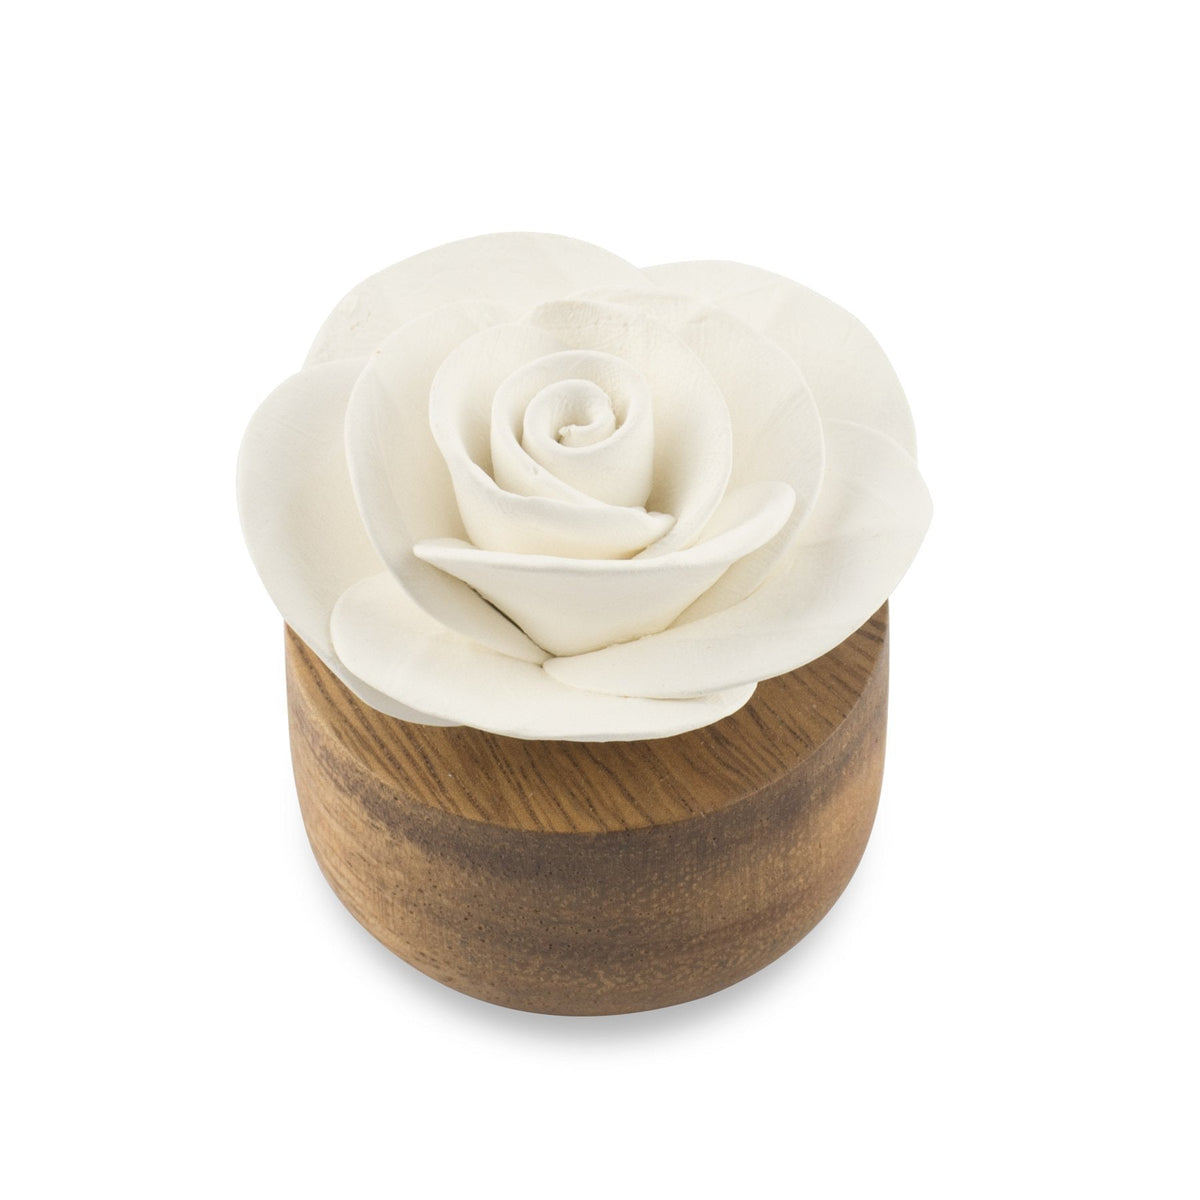 Hysses Home Scents Flower Refreshment Scenting Clay Rose